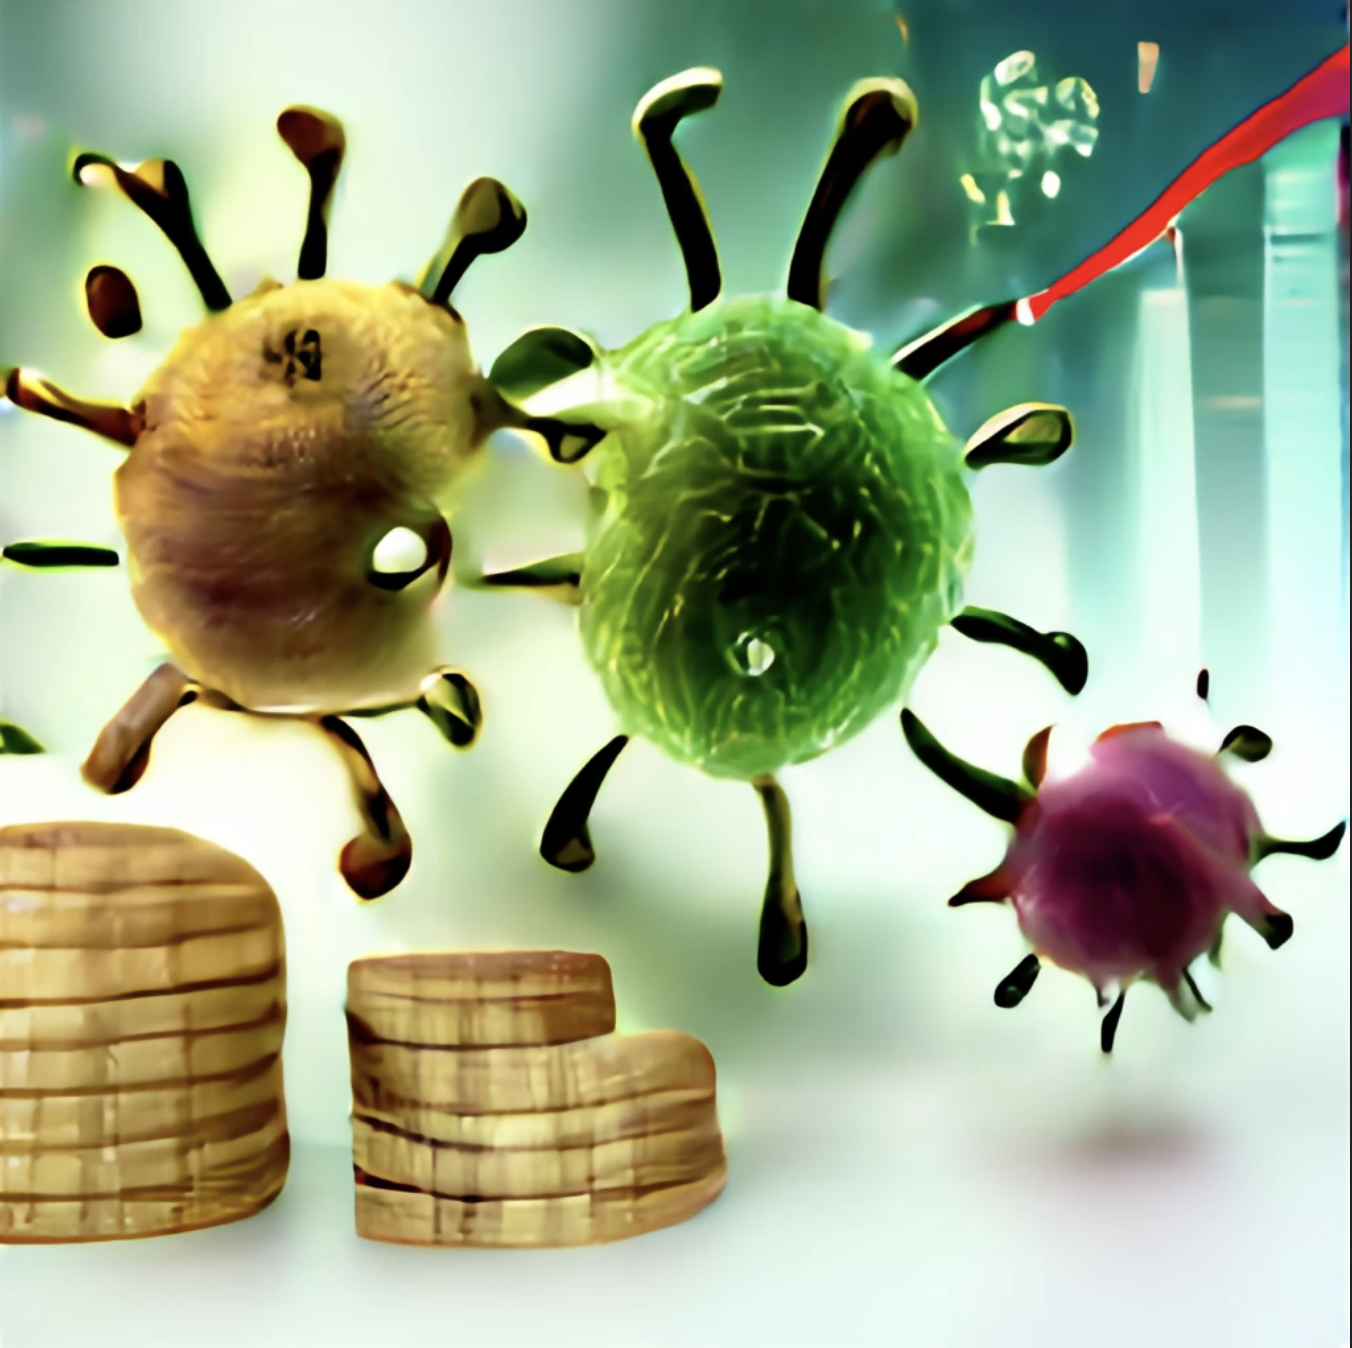 Planet Money: You asked about the virus economy